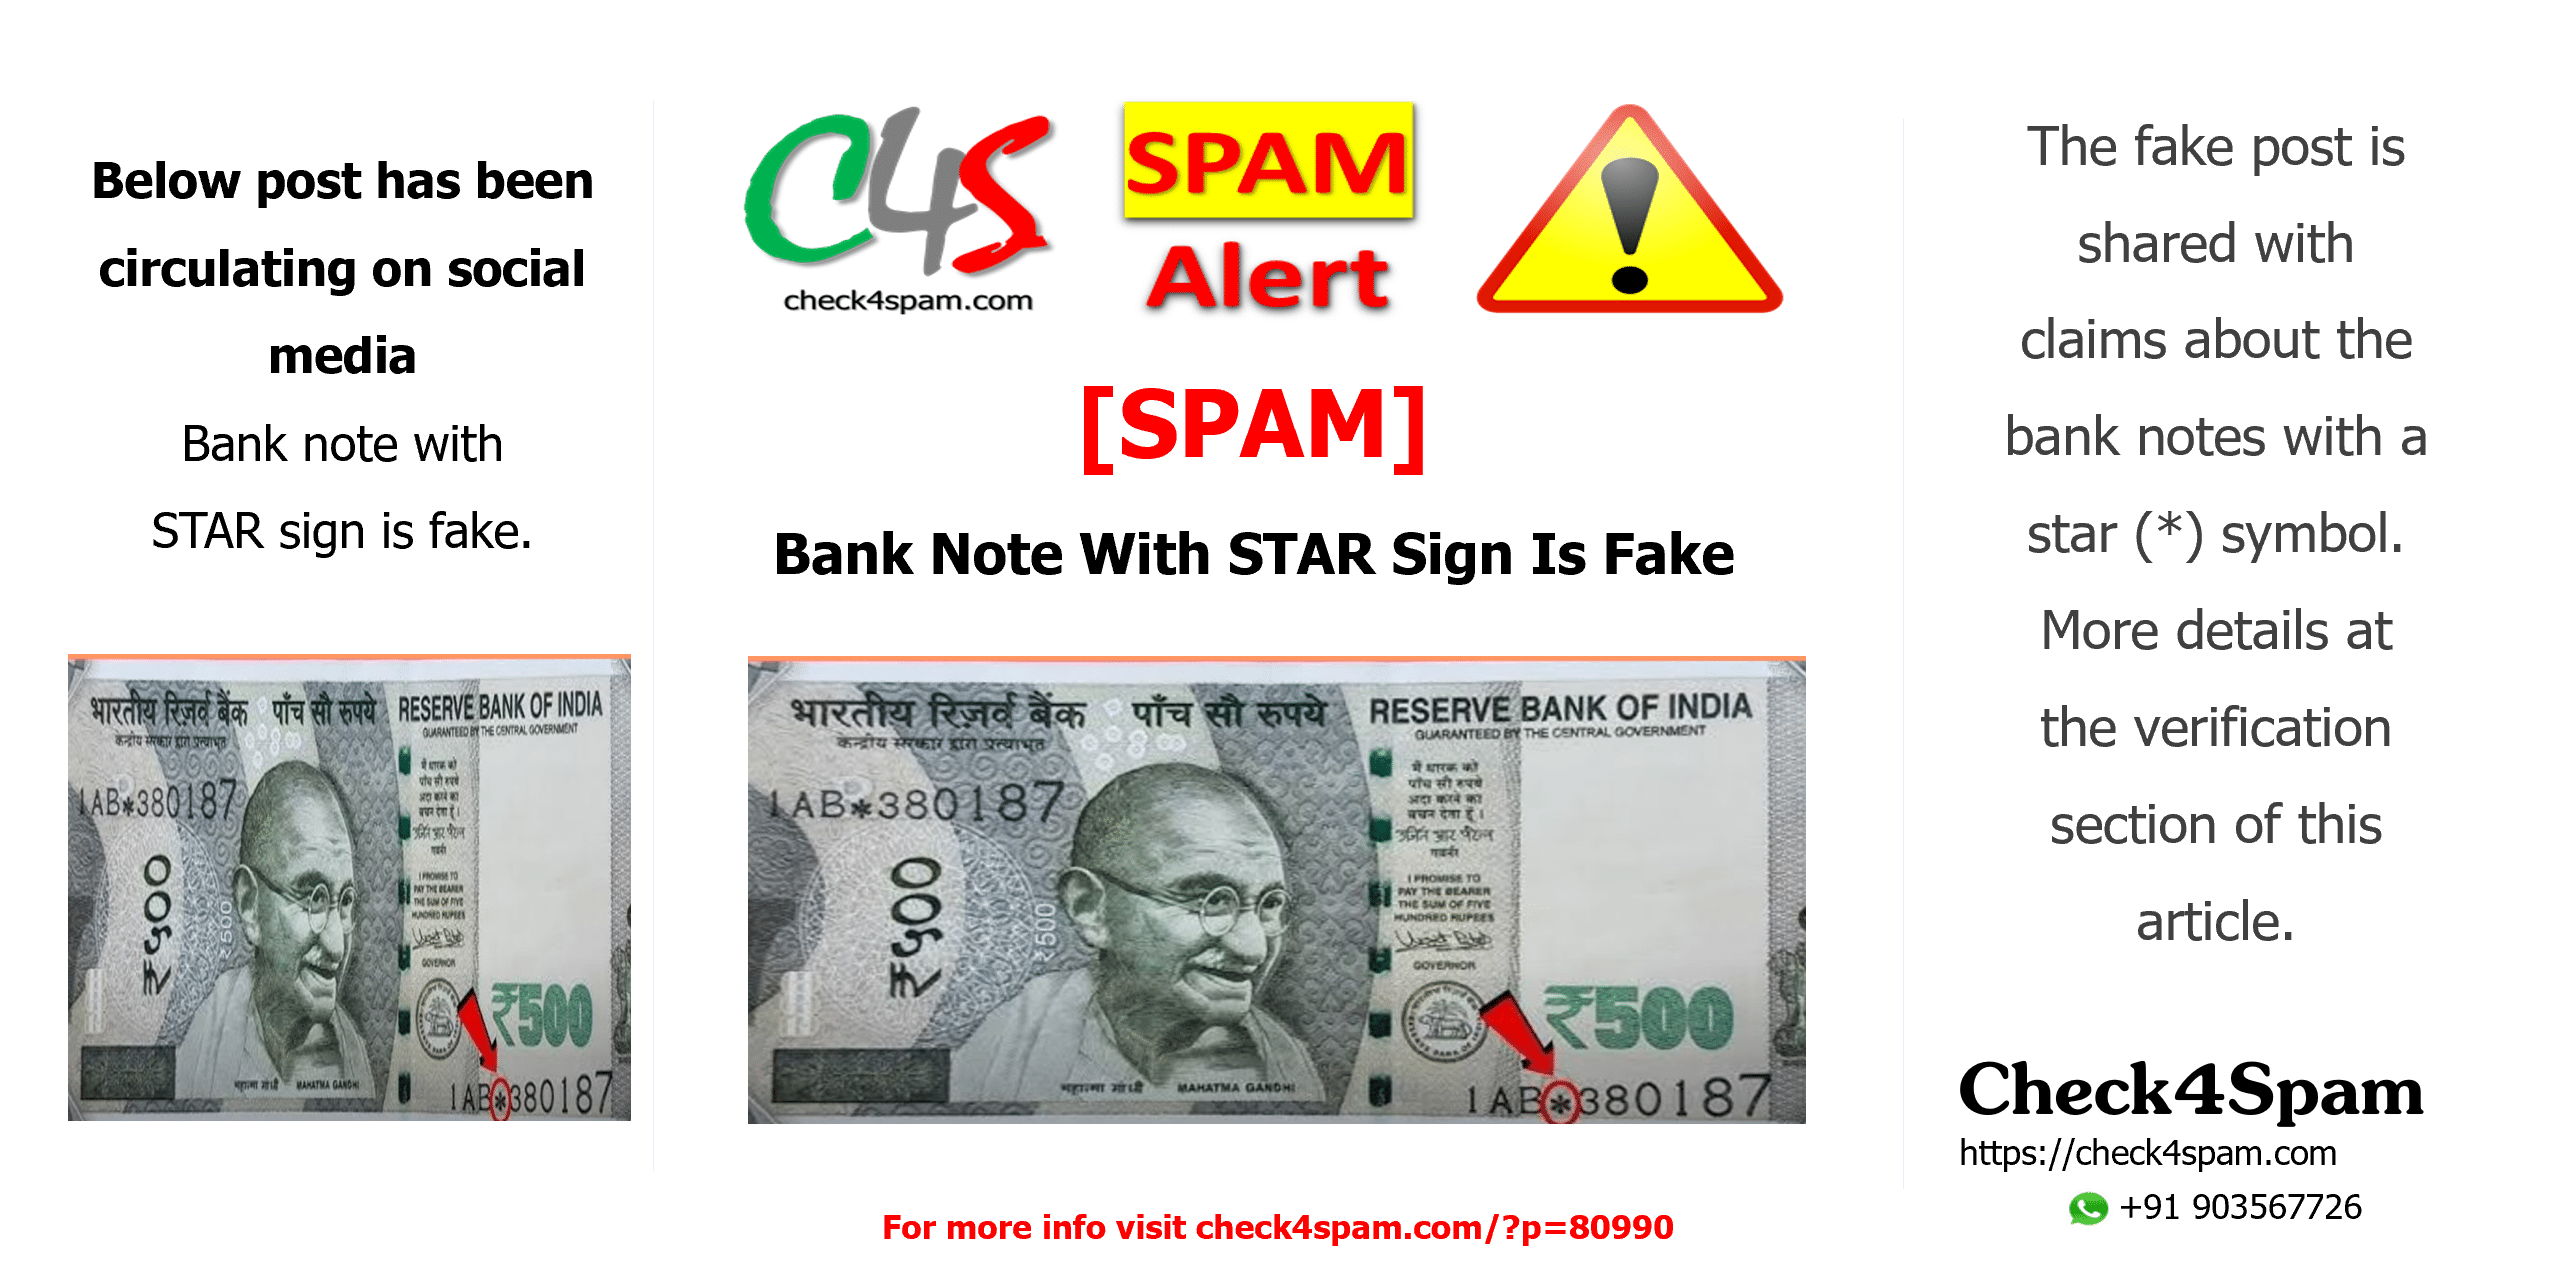 Bank Note With STAR (*) Symbol Is Fake